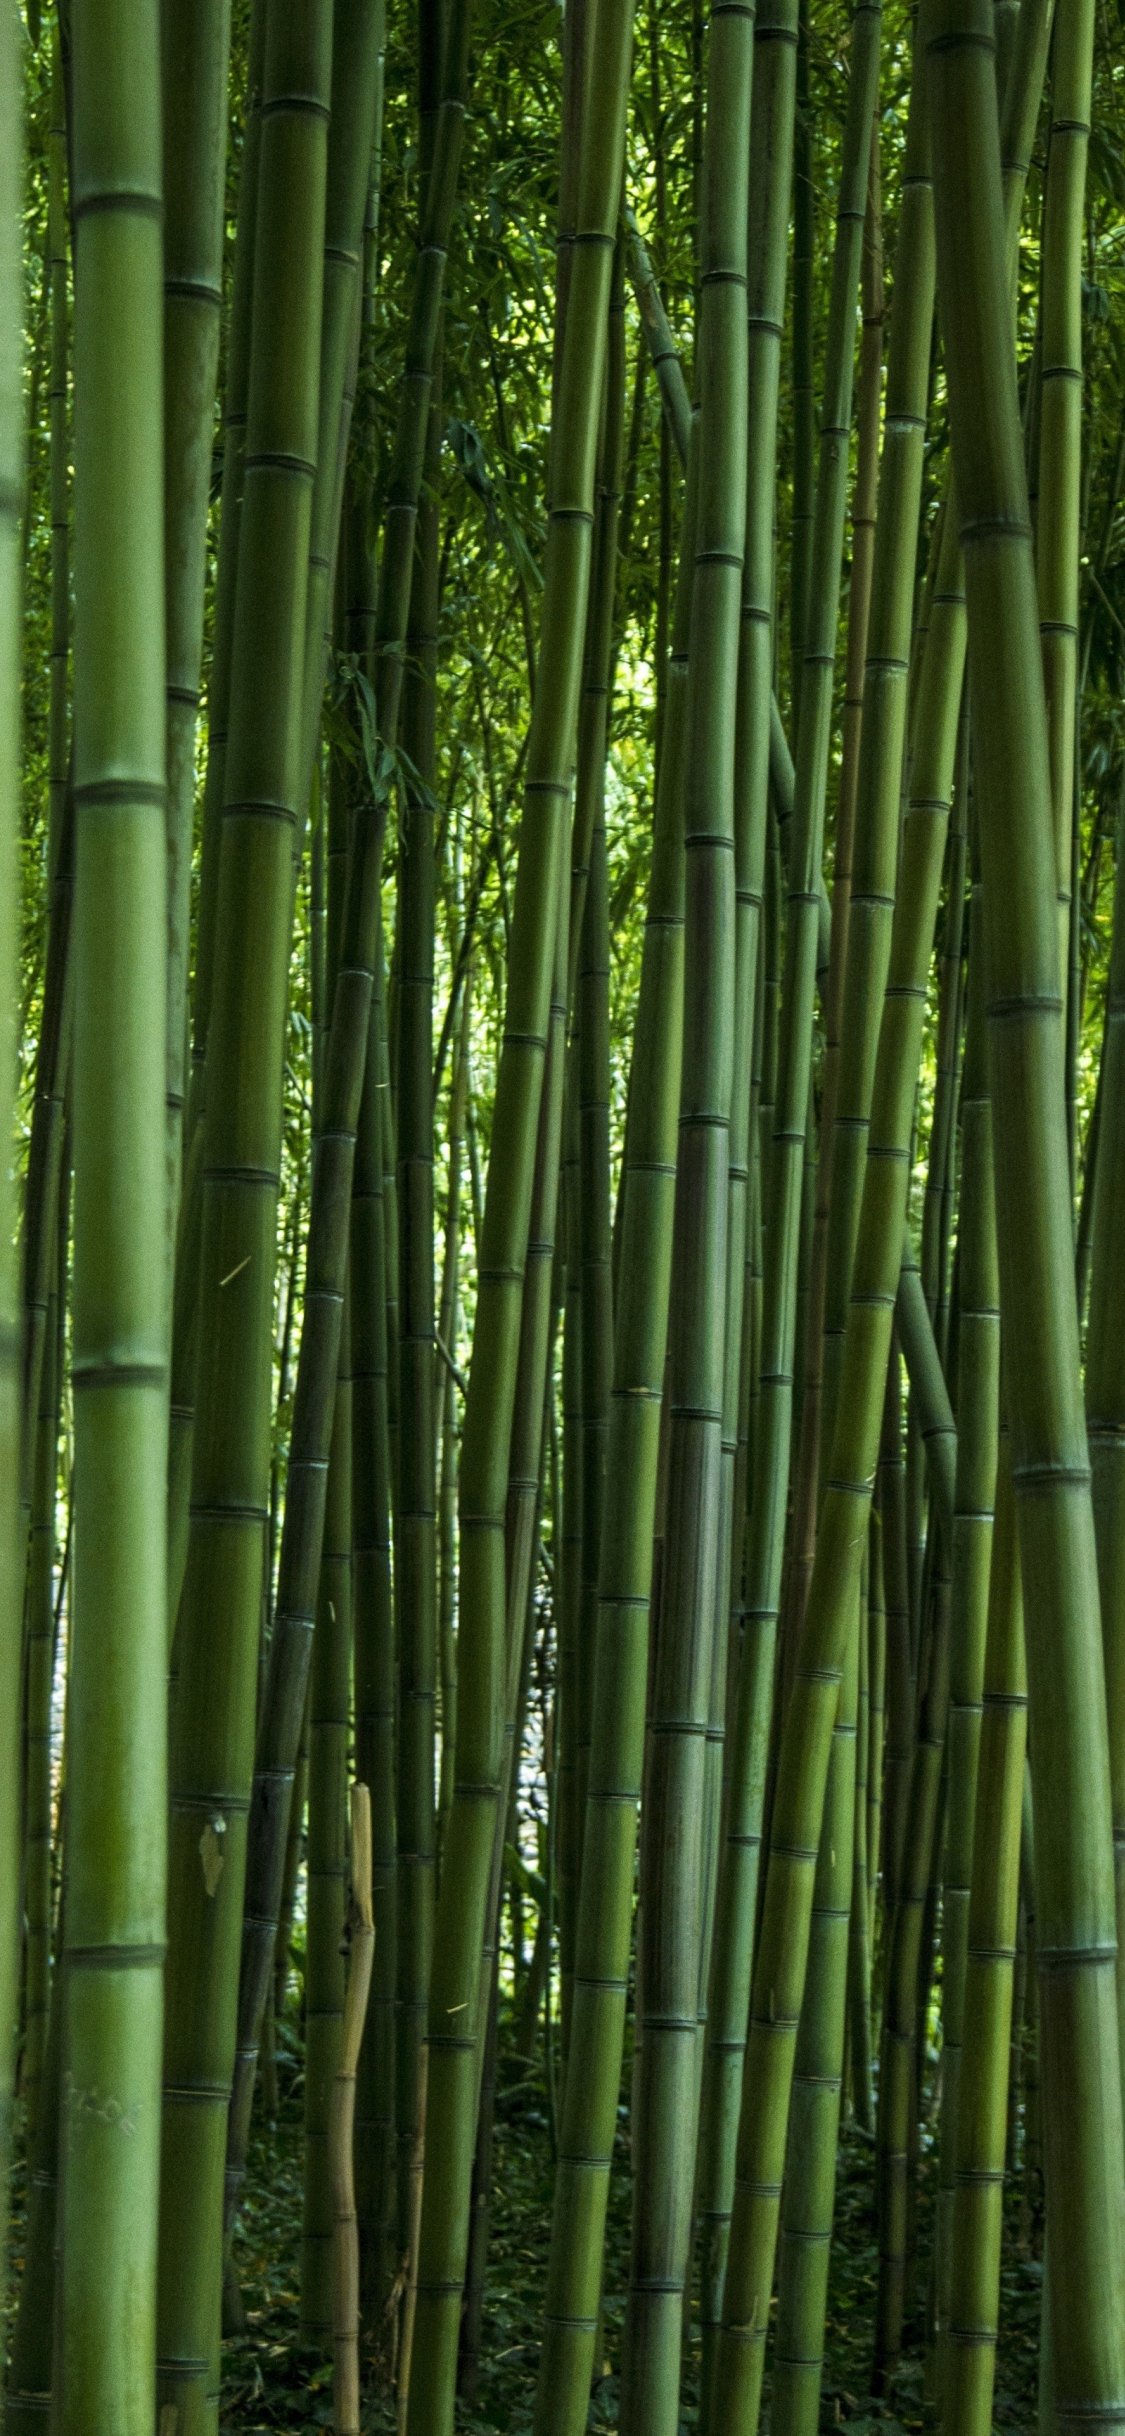 Bamboo Forest Stunning 3d Render Illustration On A Pure White Background,  Hedge, Summer Garden, Green Nature Background Image And Wallpaper for Free  Download